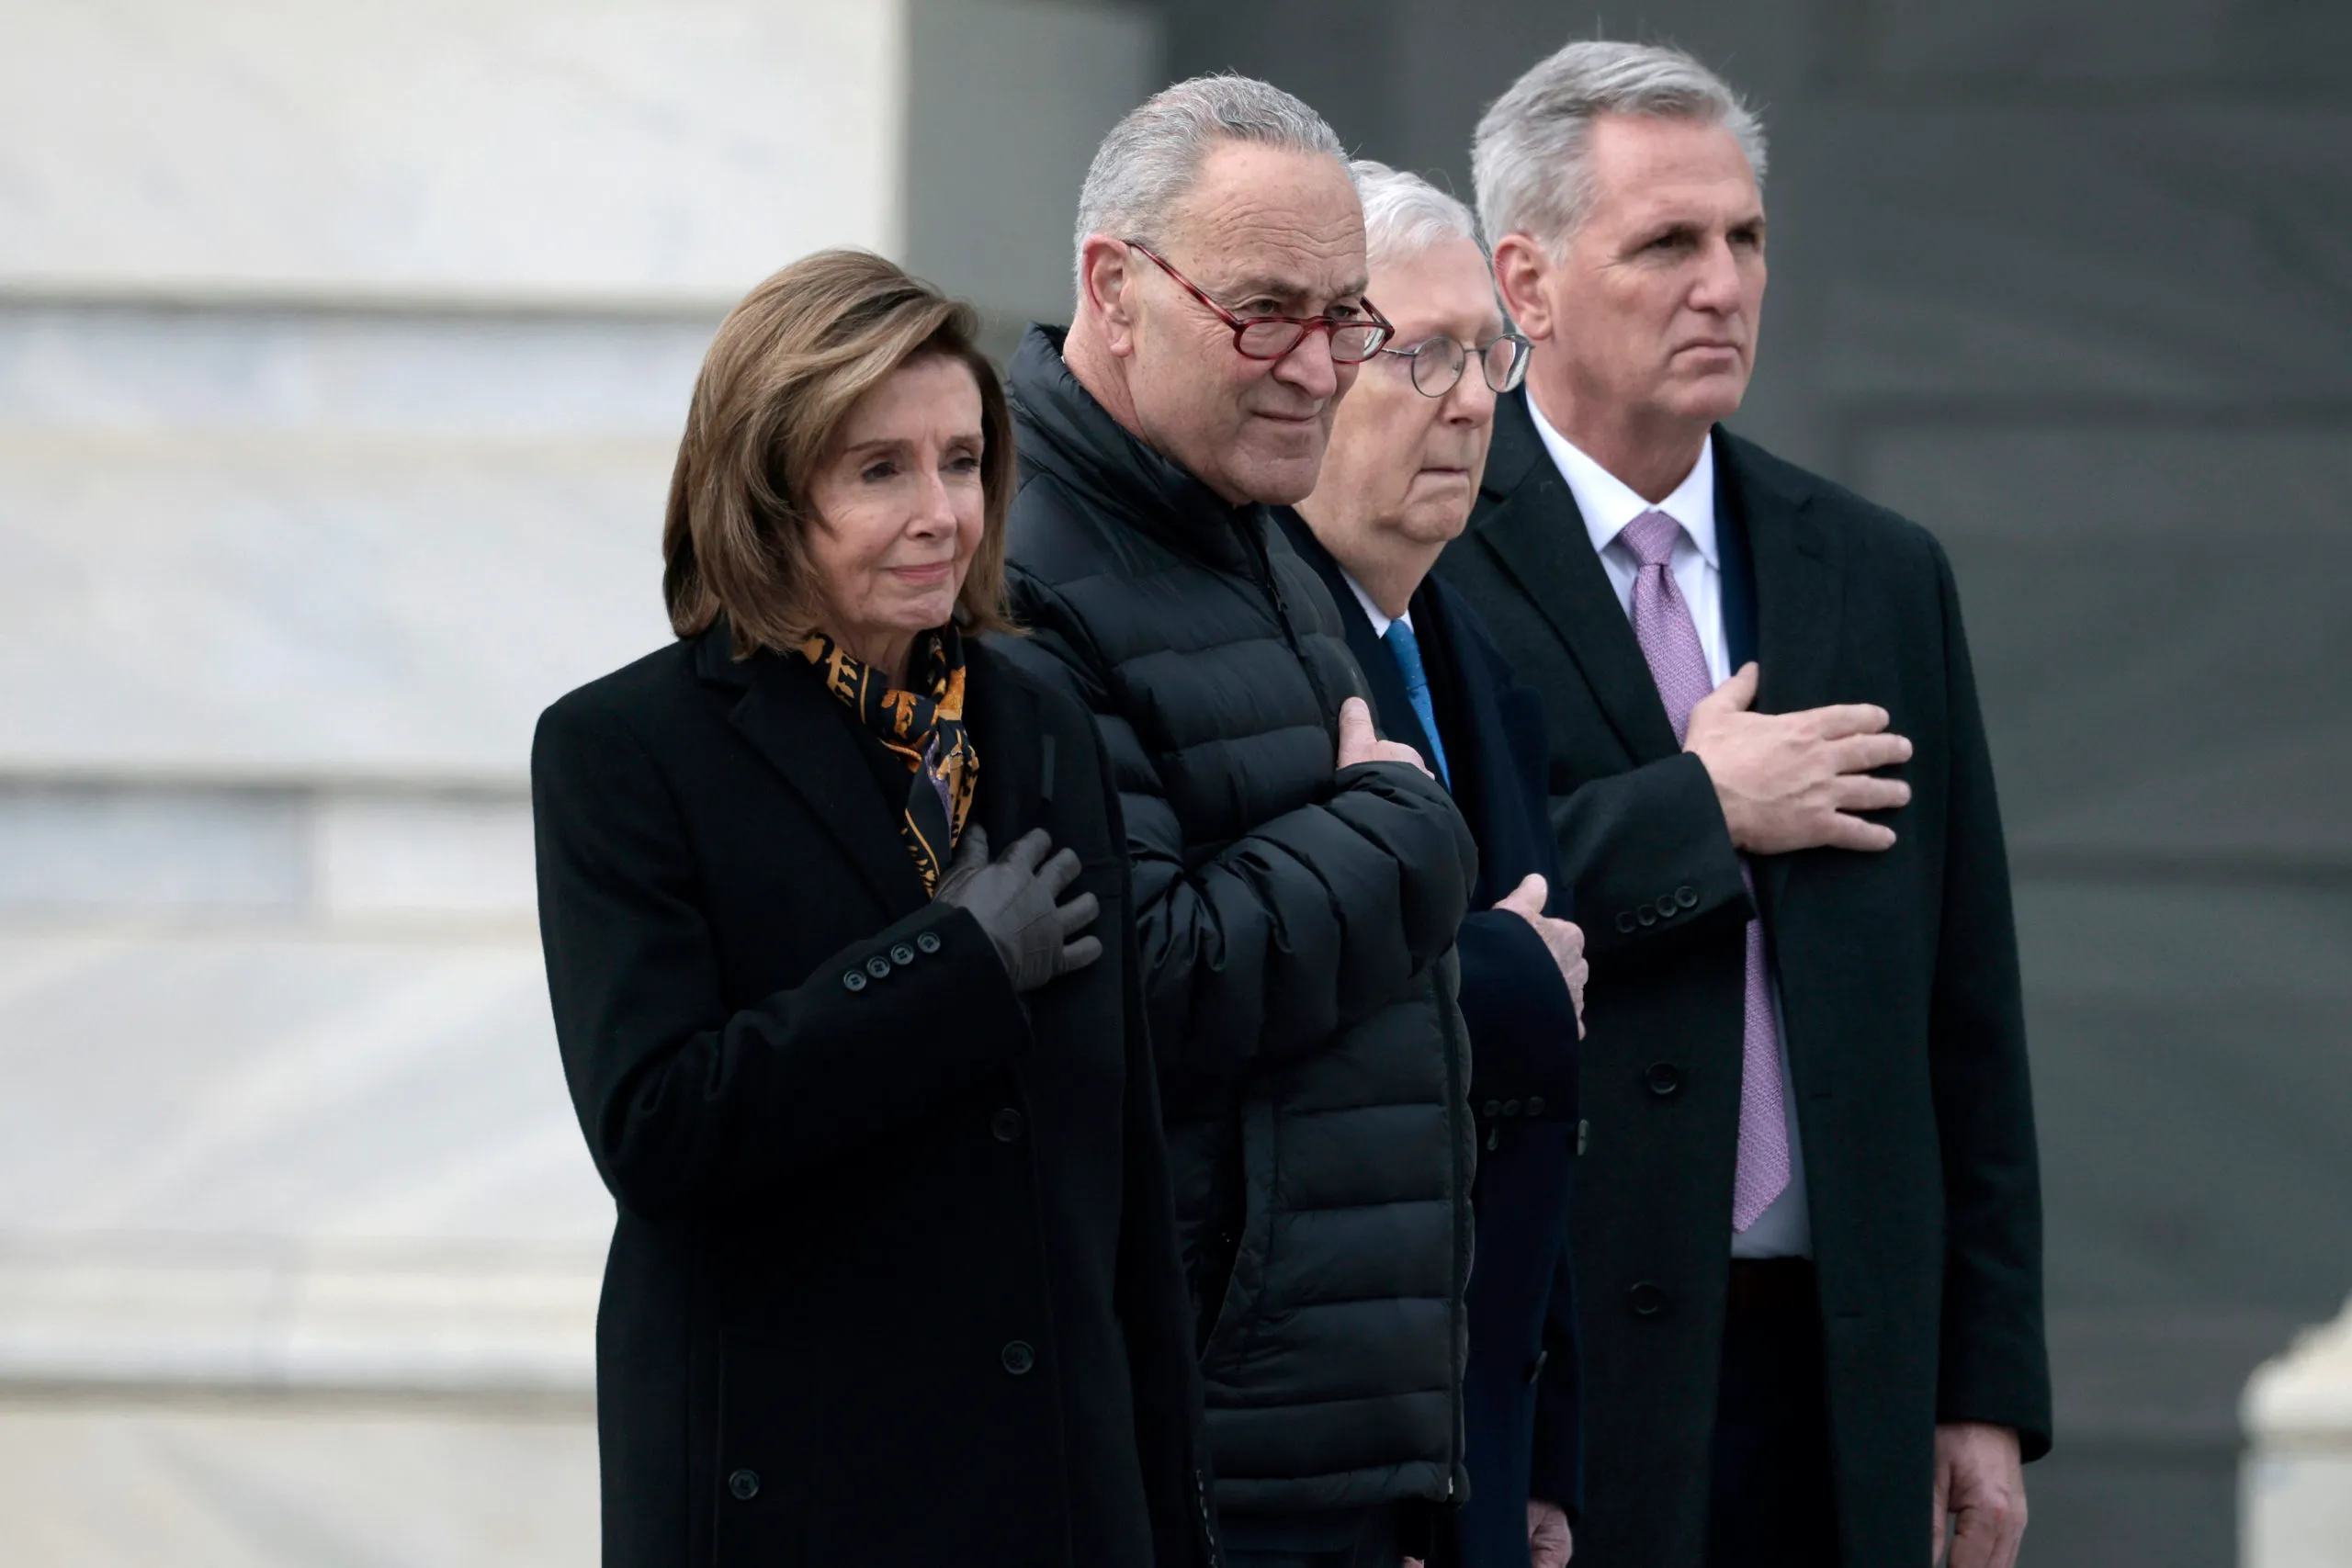 WASHINGTON, DC - DECEMBER 10: Speaker of the House Nancy Pelosi (D-CA), Majority Leader Charles Schumer (D-NY), Minority Leader Mitch McConnell (R-KY) and House Minority Leader Kevin McCarthy (R-CA) watch as joint services military honor guard carries the casket of the late Sen. Robert Dole (R-KS) down the steps of the U.S. Capitol after lying in state on December 10, 2021 in Washington, DC. Dole, a veteran who was severely injured in World War II, was a Republican Senator from Kansas from 1969 to 1996. He ran for president three times and became the Republican nominee for president in 1996. (Photo by Anna Moneymaker/Getty Images)